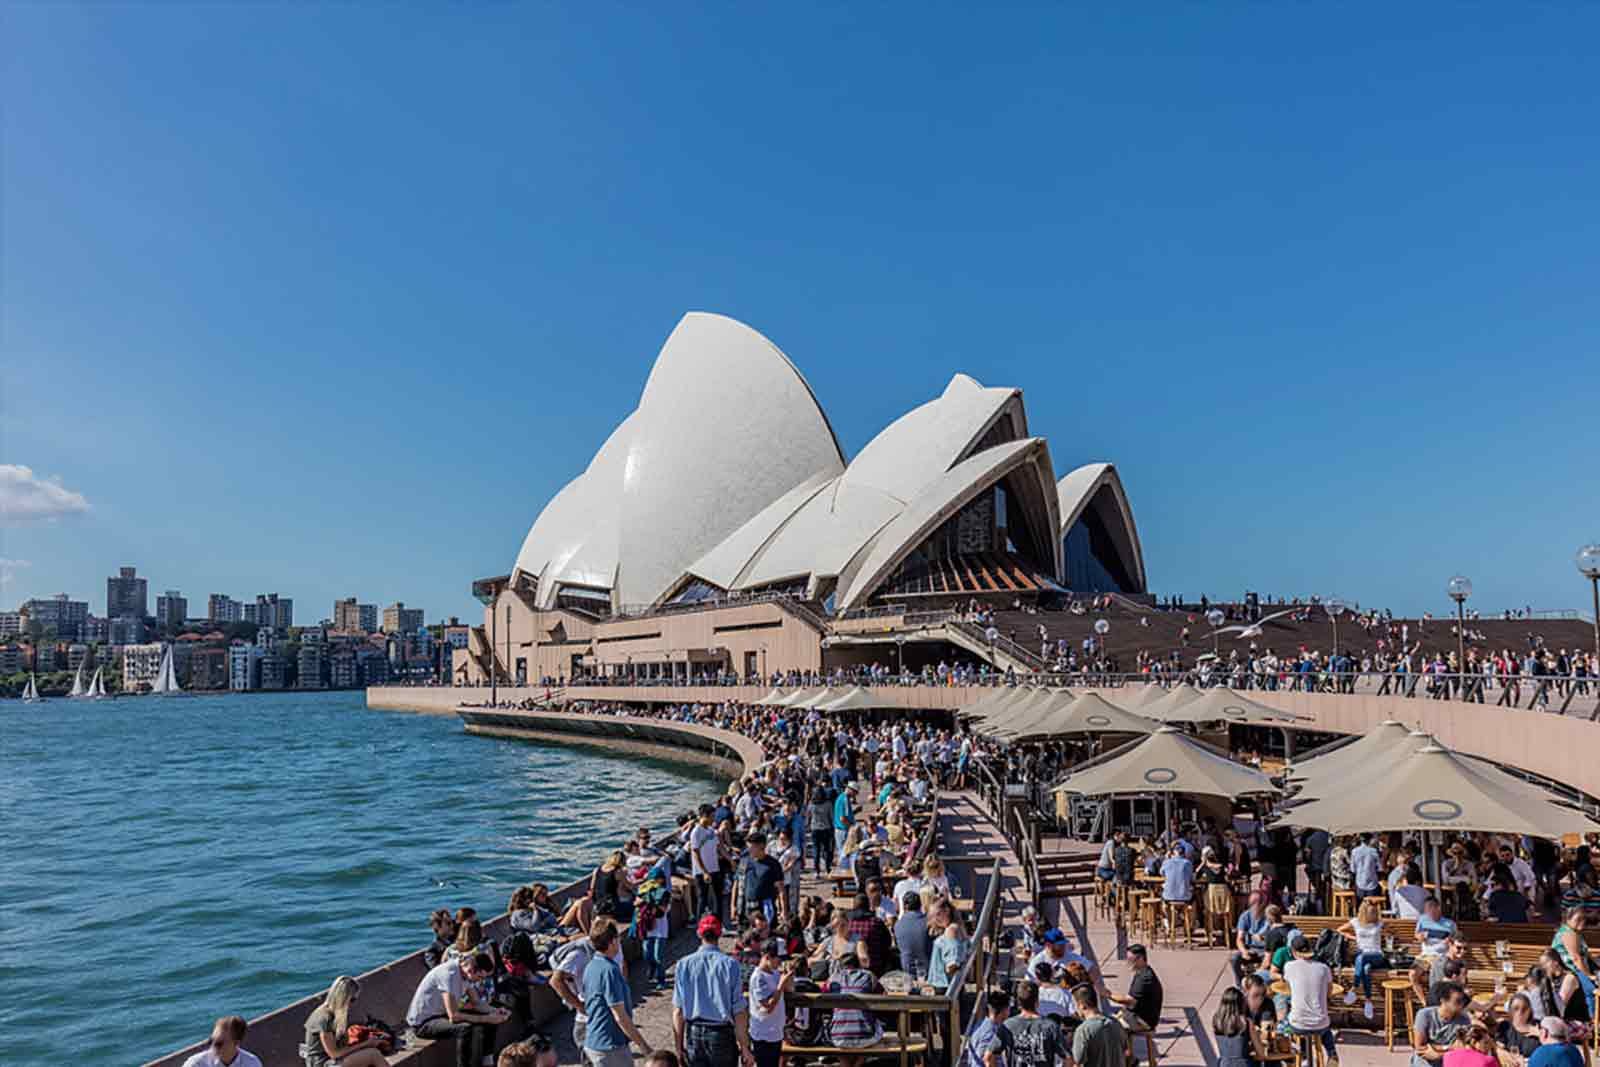 People at the Sydney Opera House